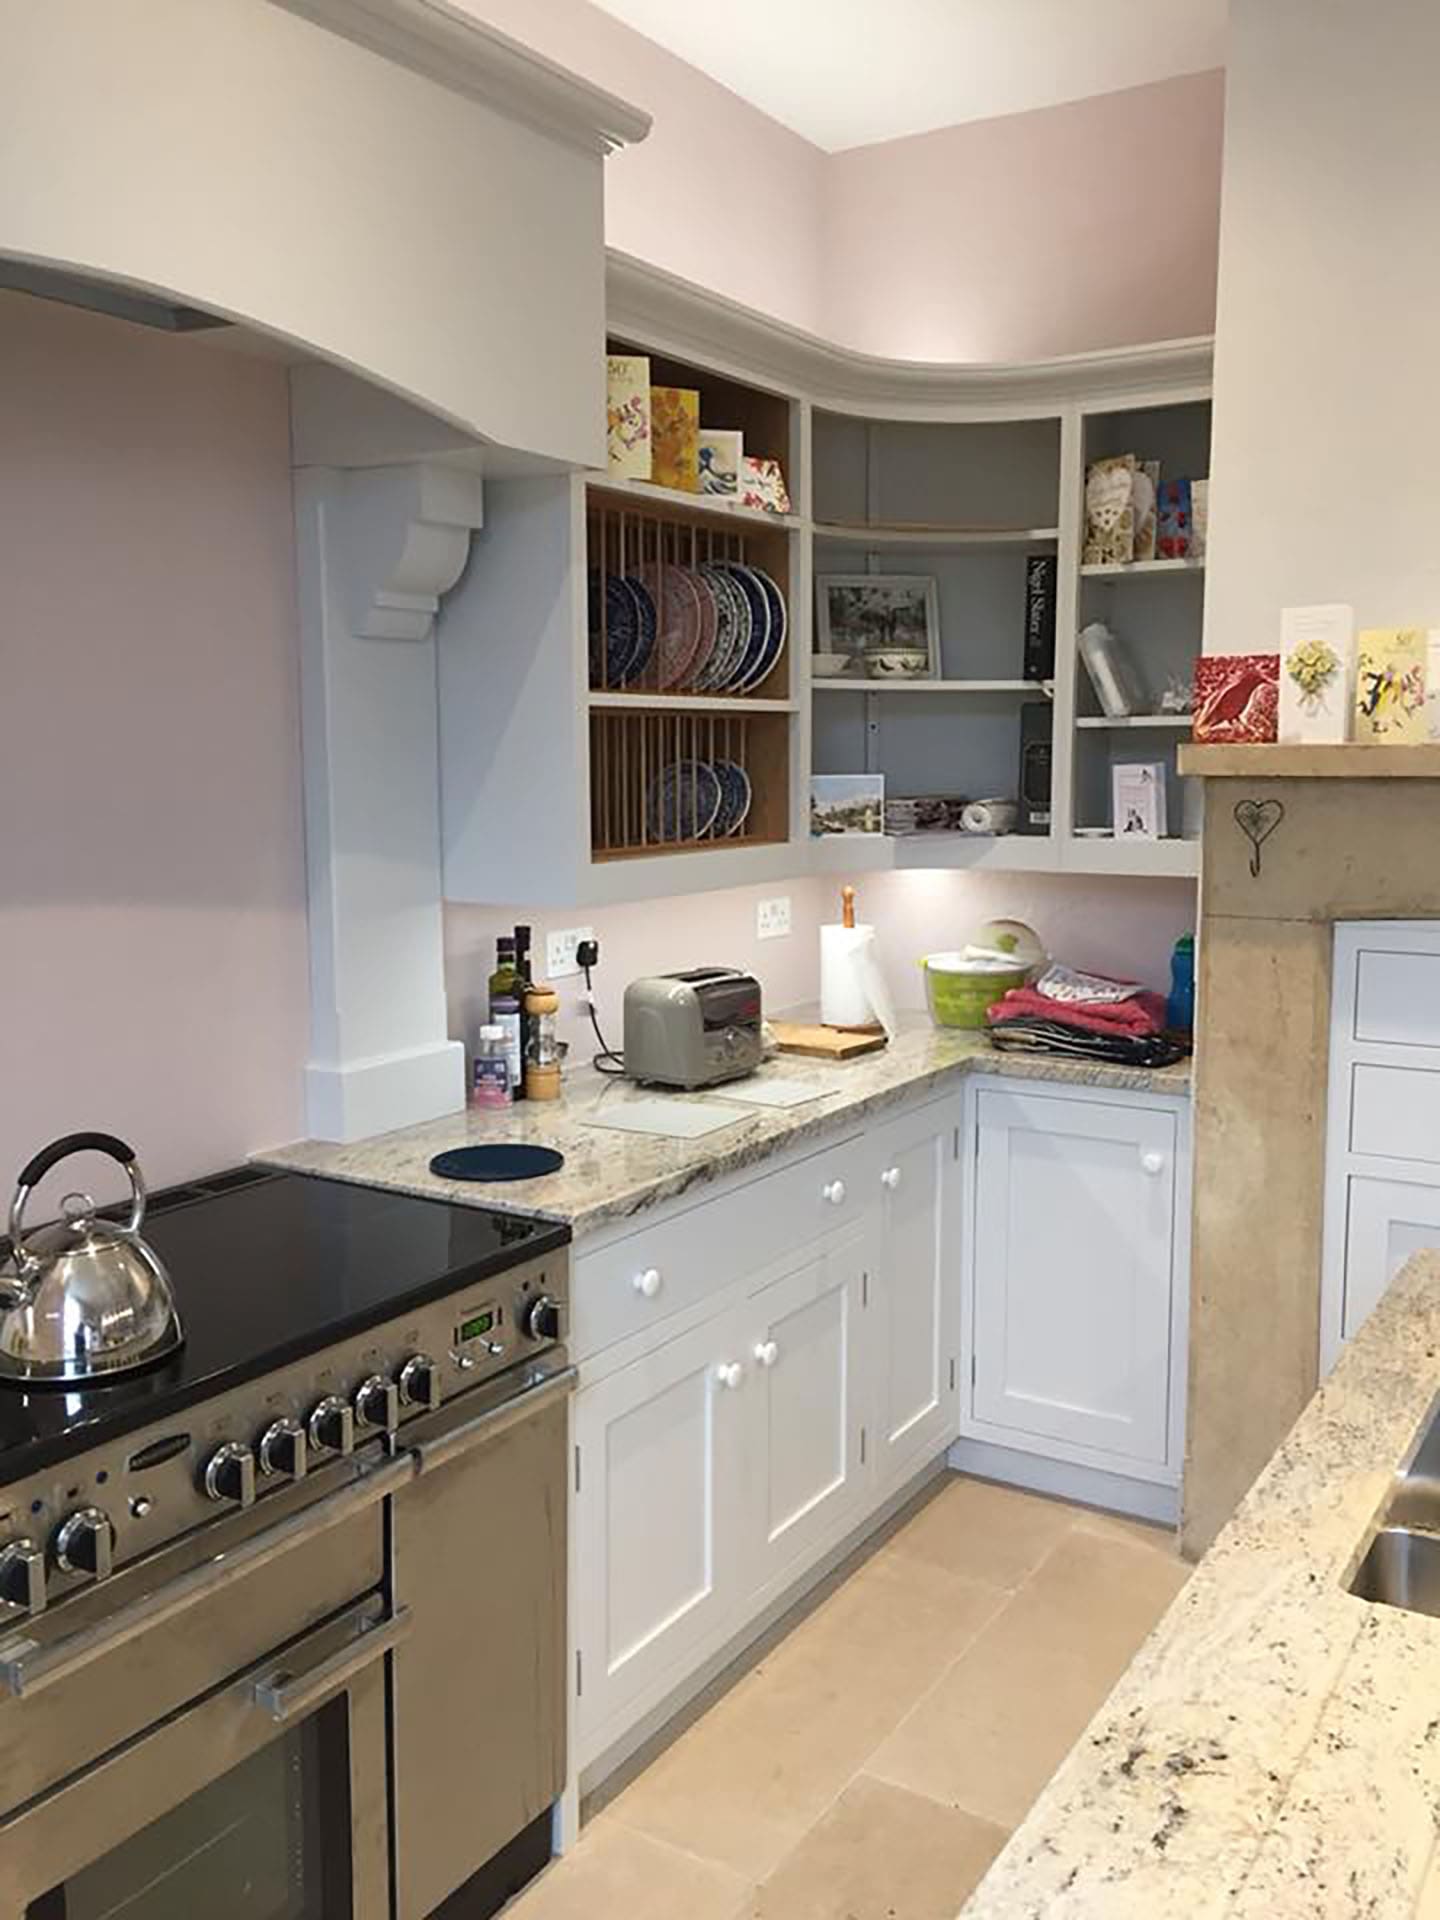 Kitchen cupboards beside a cooking stove